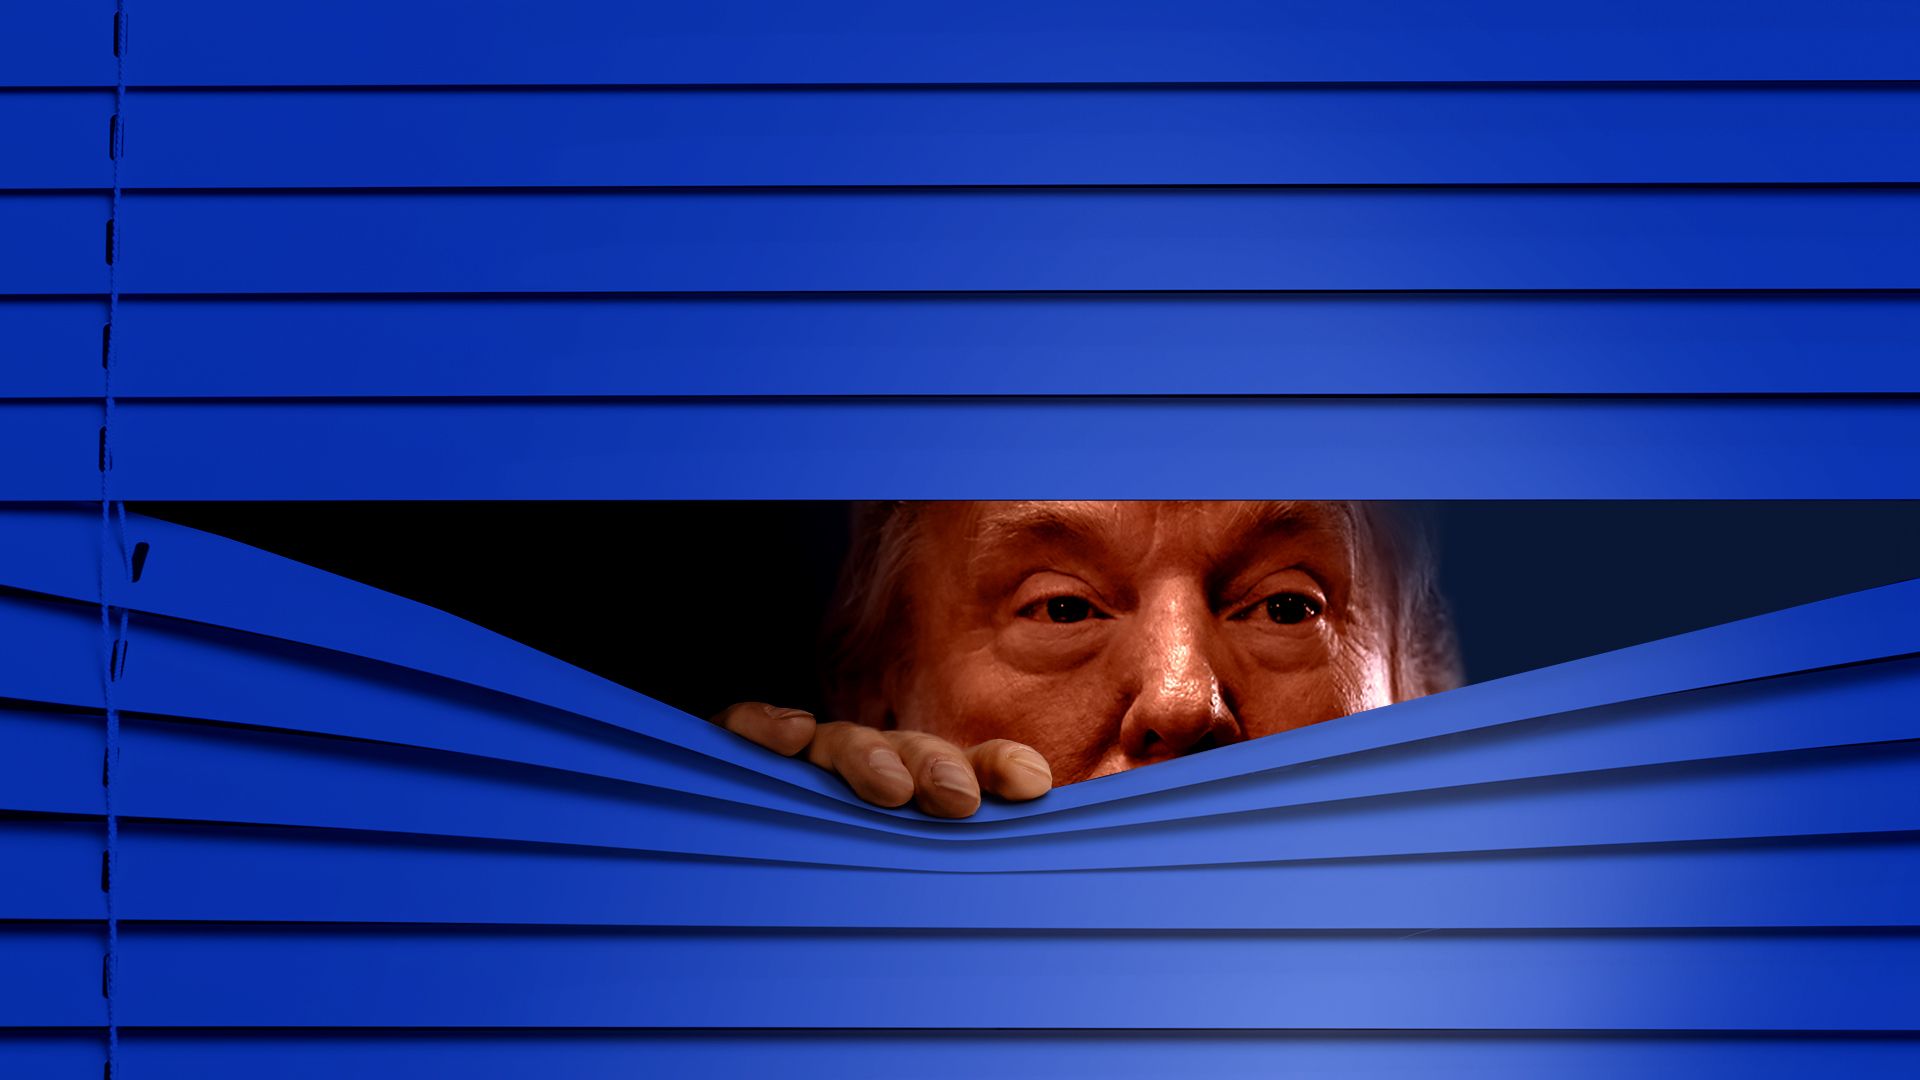 A conceptual illustration of Donald Trump suspiciously peering through the blinds.